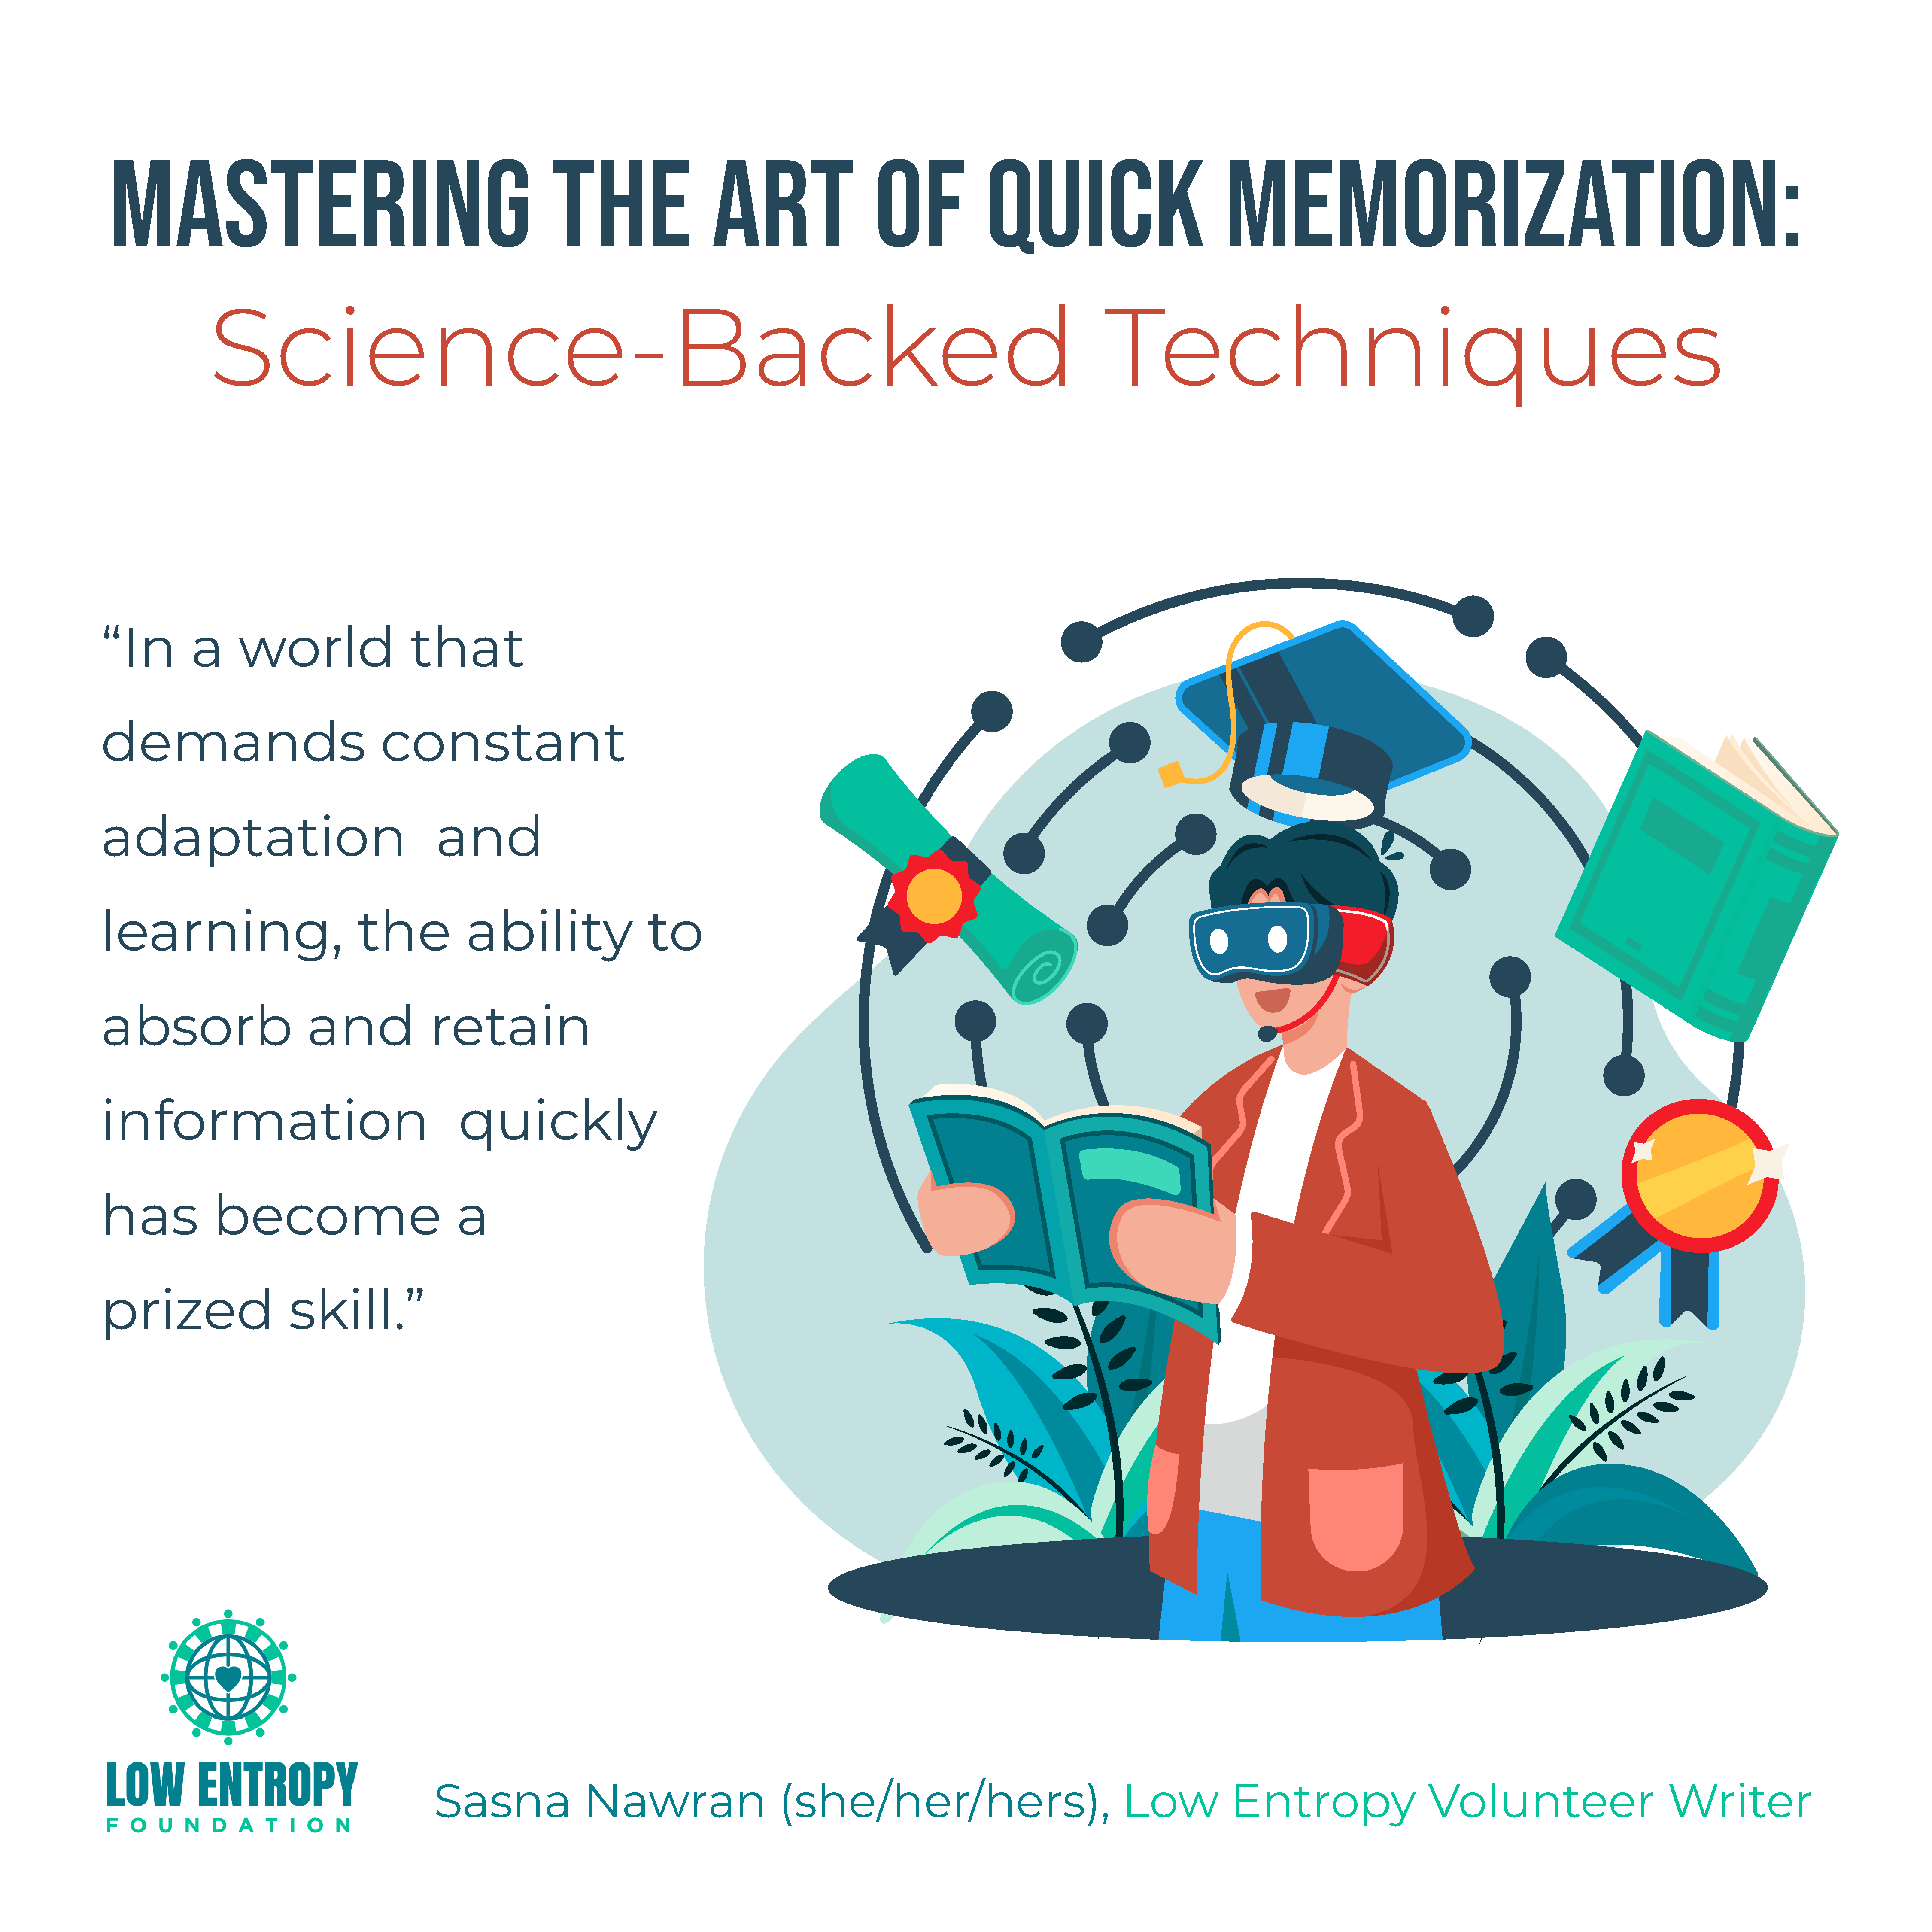 Mastering the Art of Quick Memorization: Science-Backed Techniques